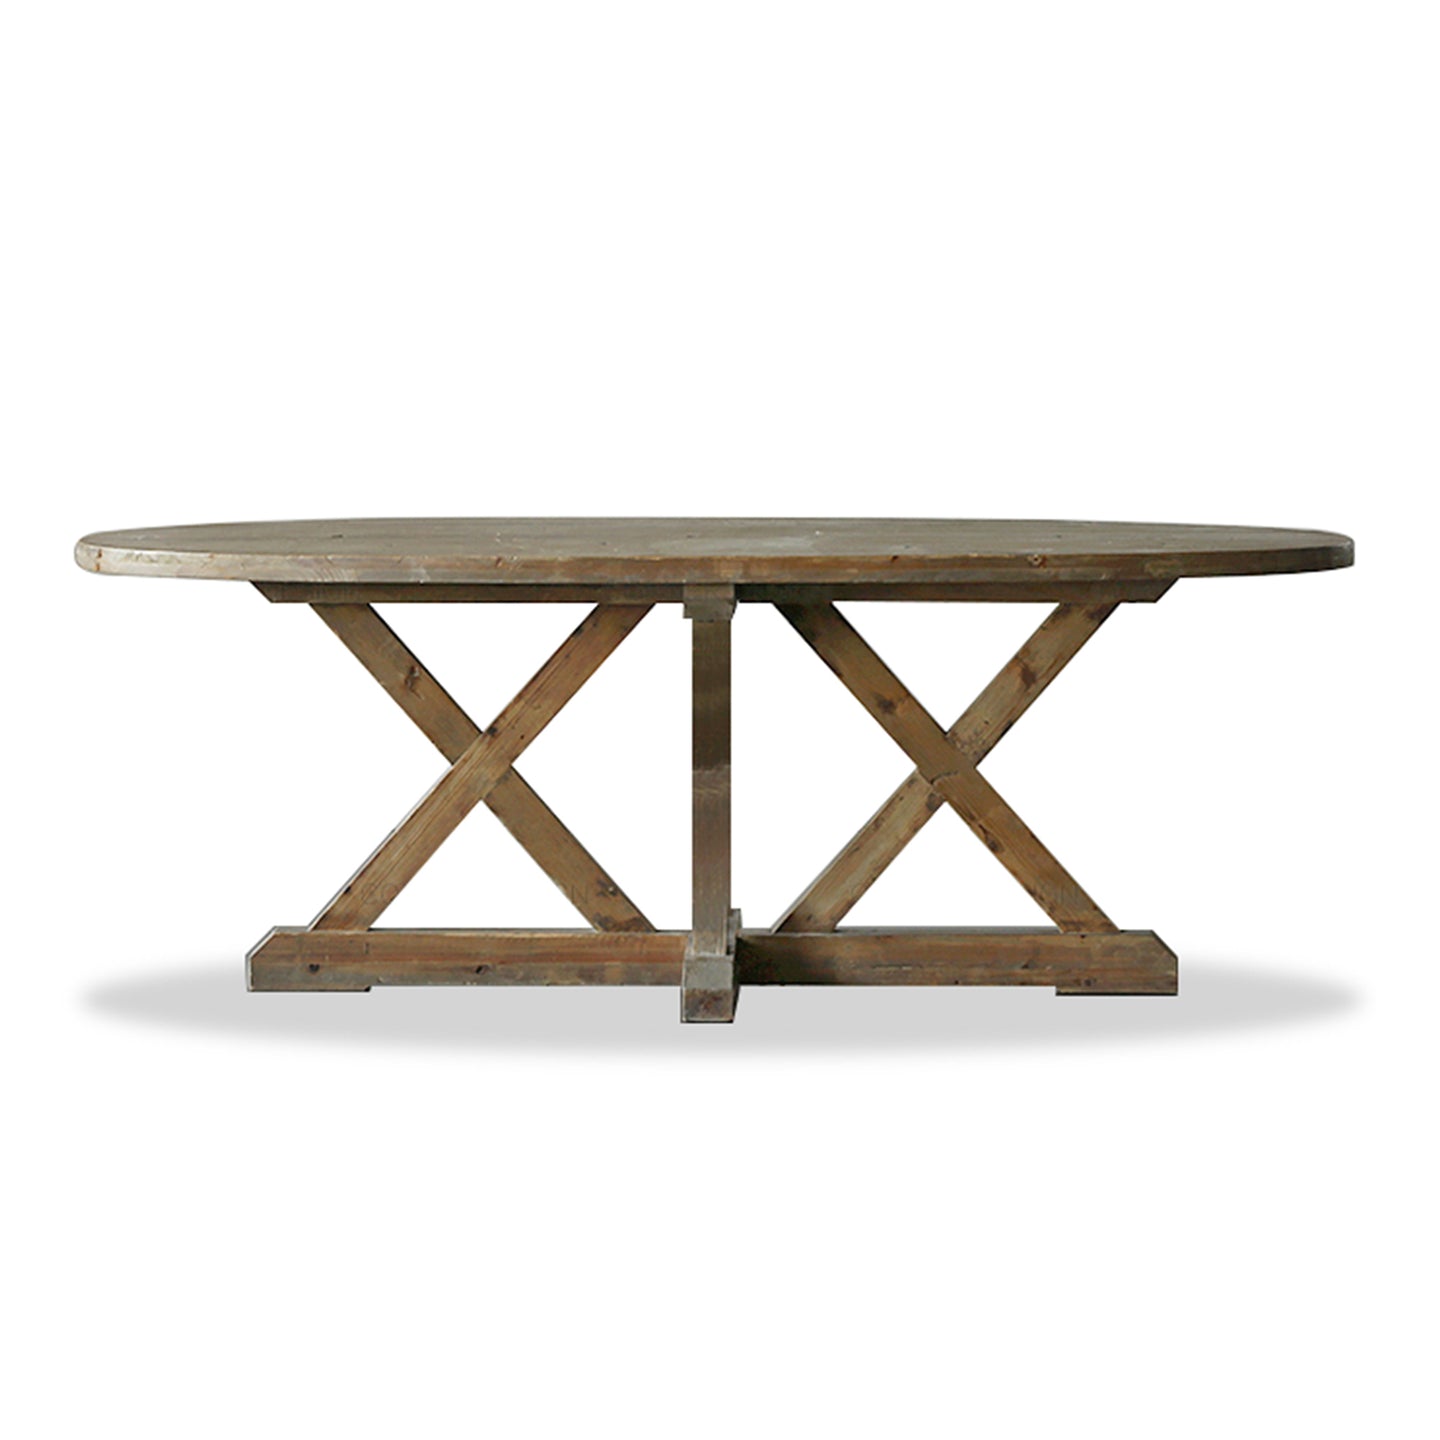 CLOVER OVAL DINING TABLE